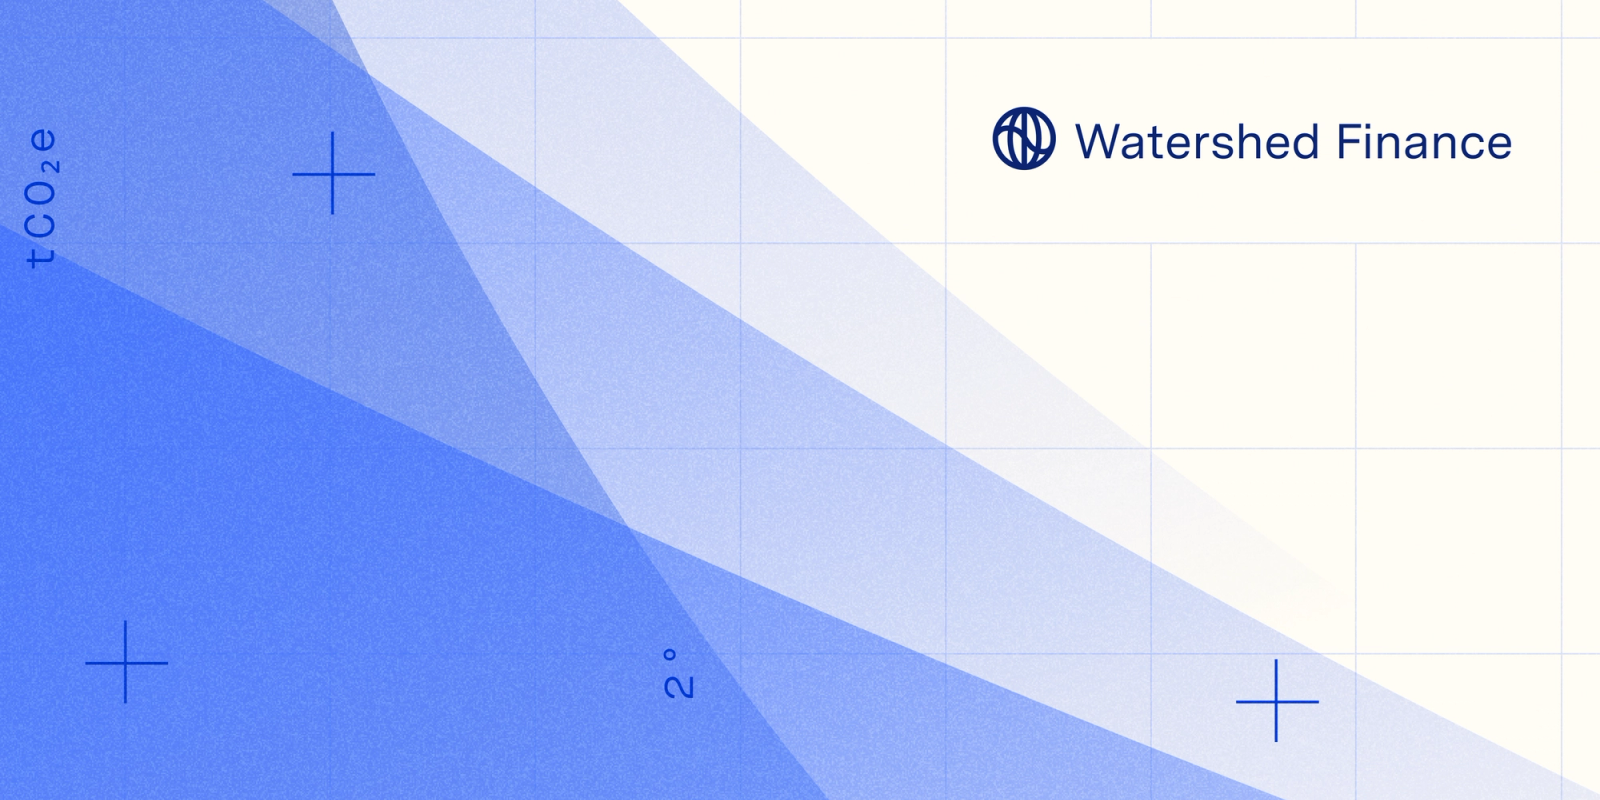 Introducing Watershed Finance: a climate toolbox for asset managers